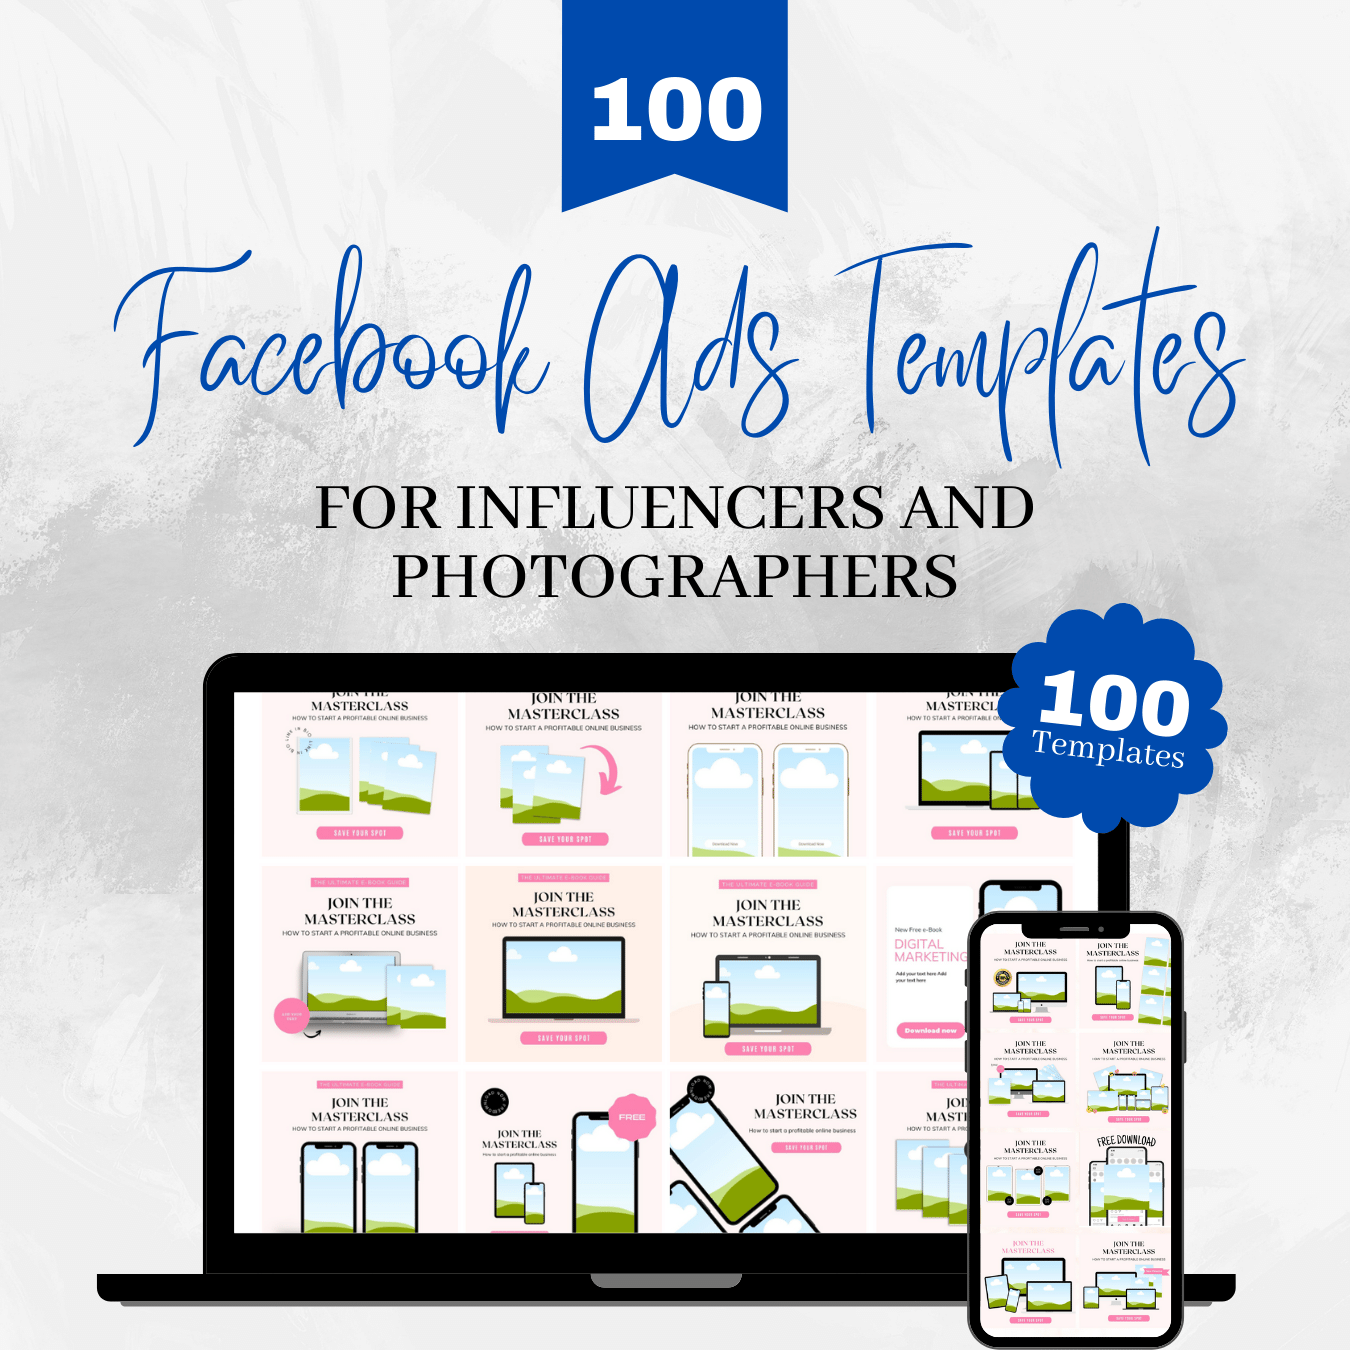 100 Facebook Ads templates for Influencers and Photographers